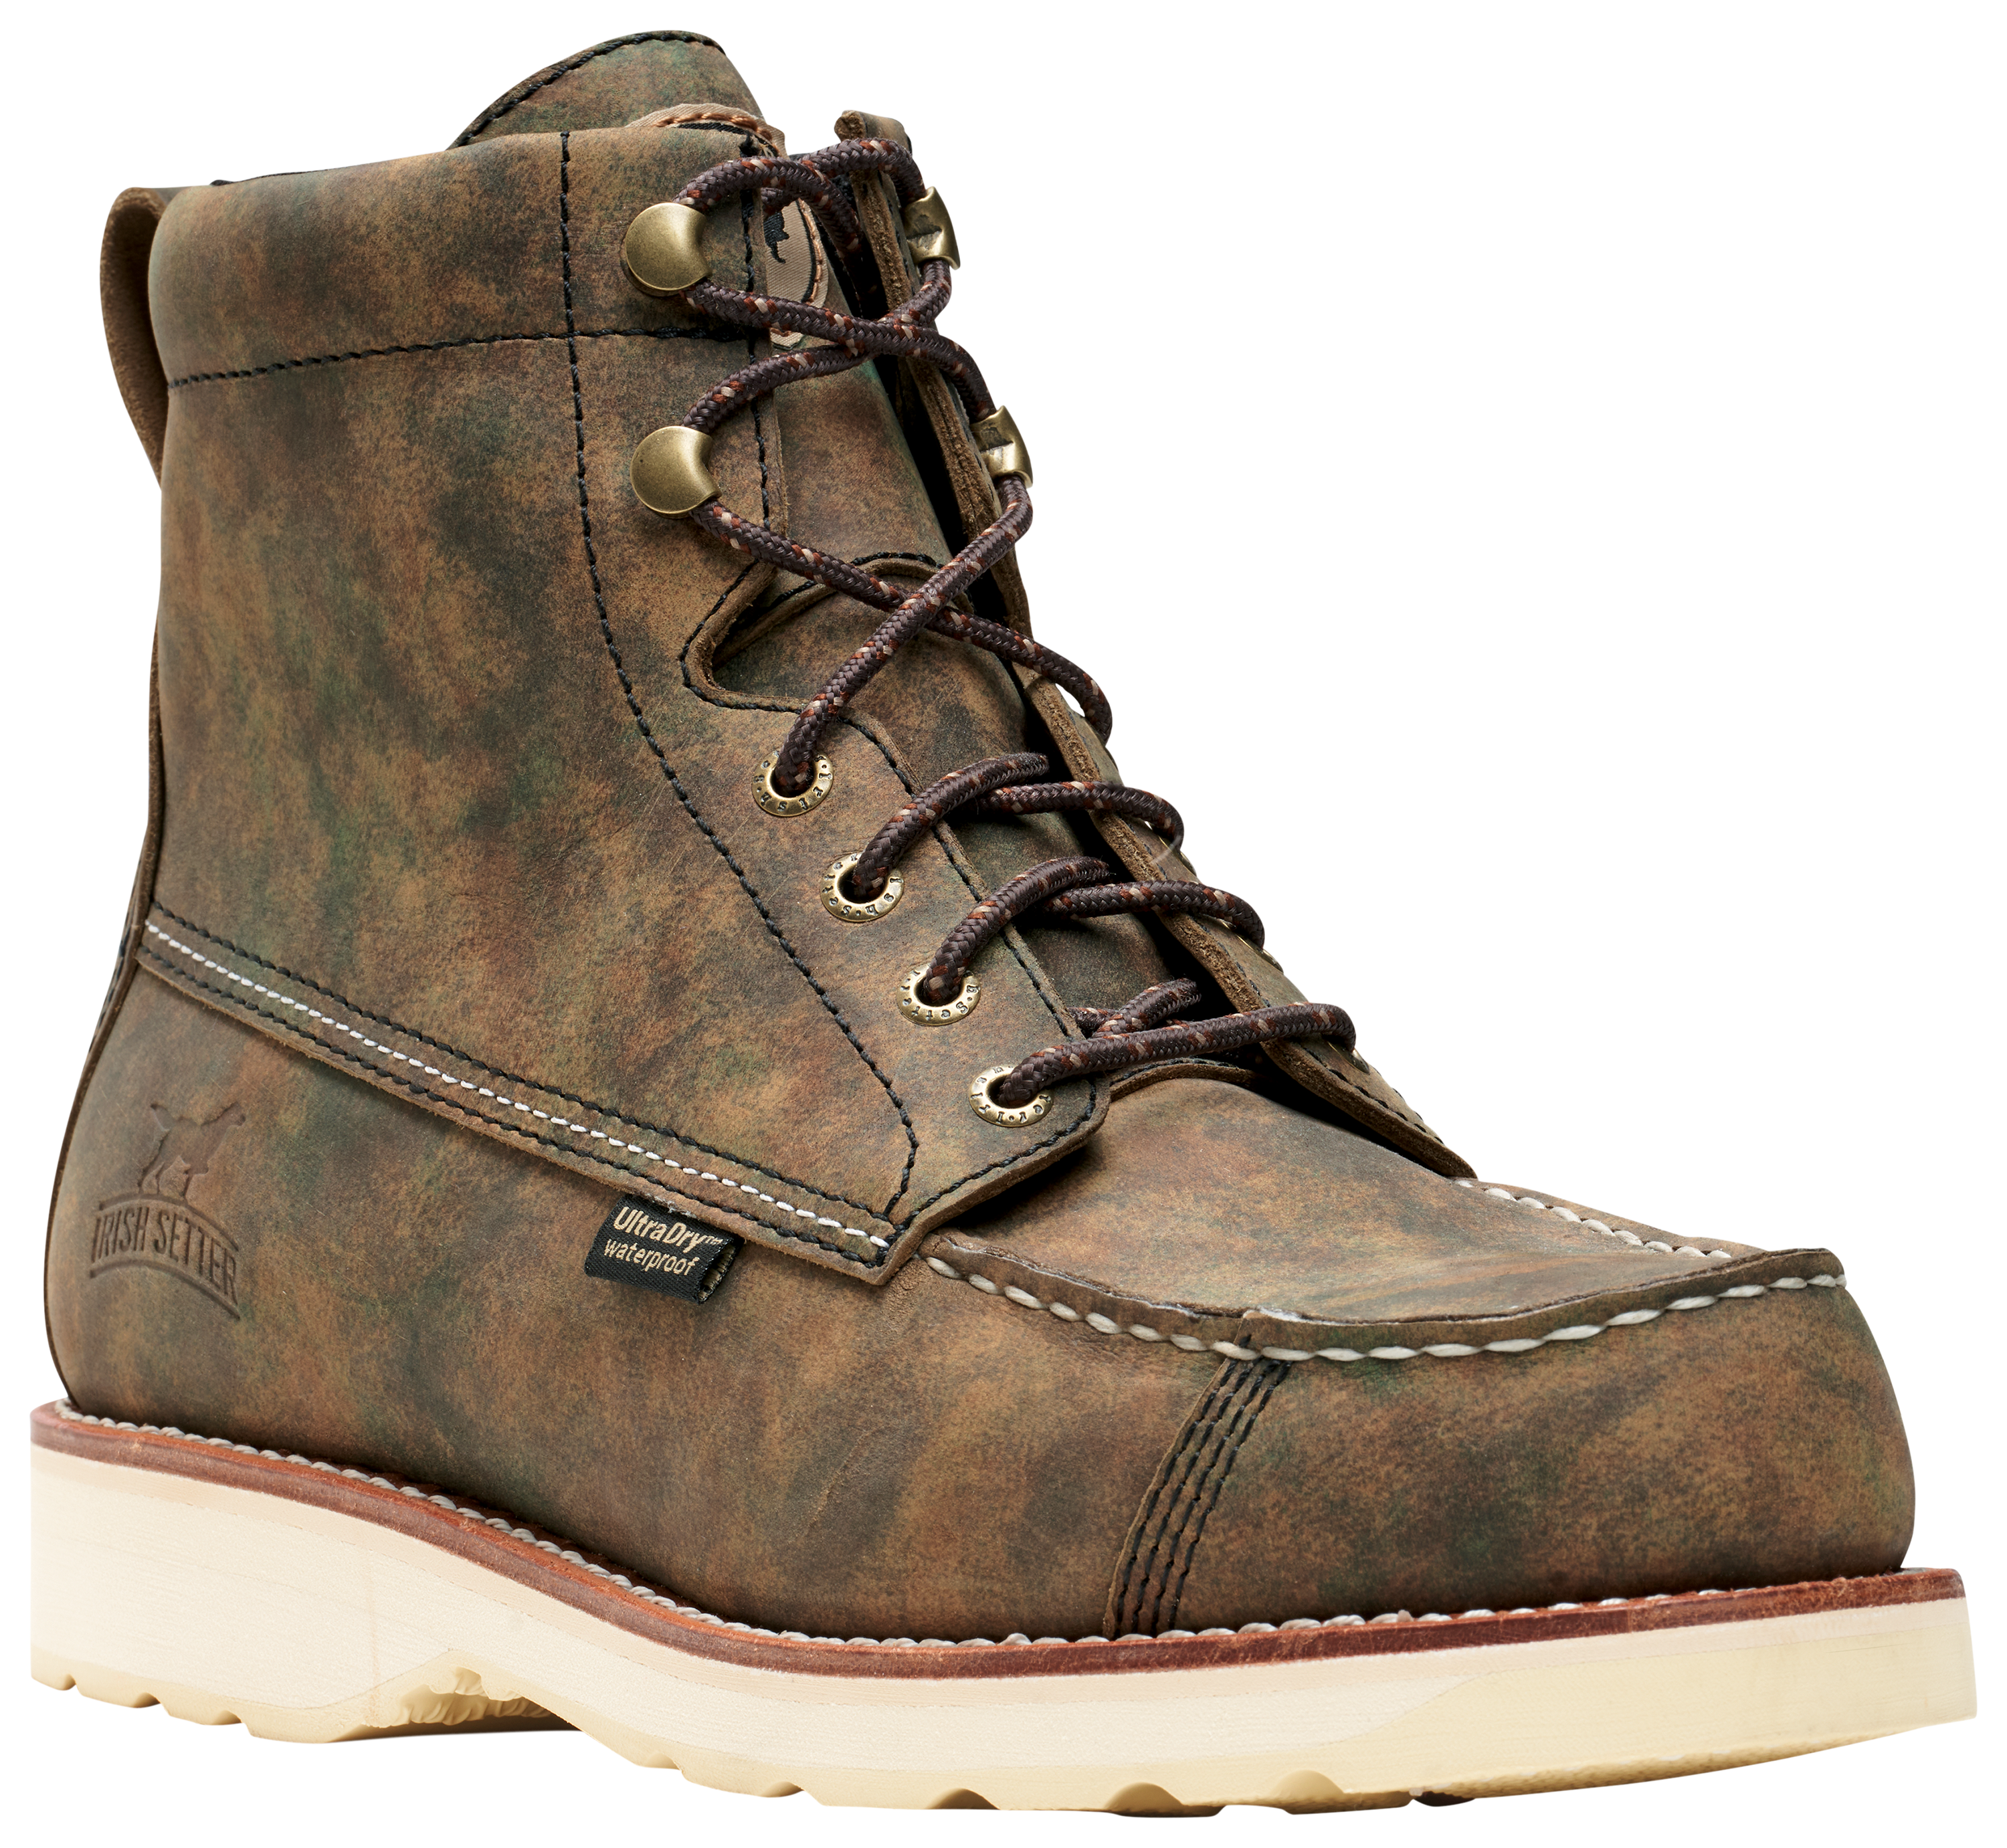 Irish Setter Wingshooter 7 Waterproof Hunting Boots for Men - Earth Camo - 11W